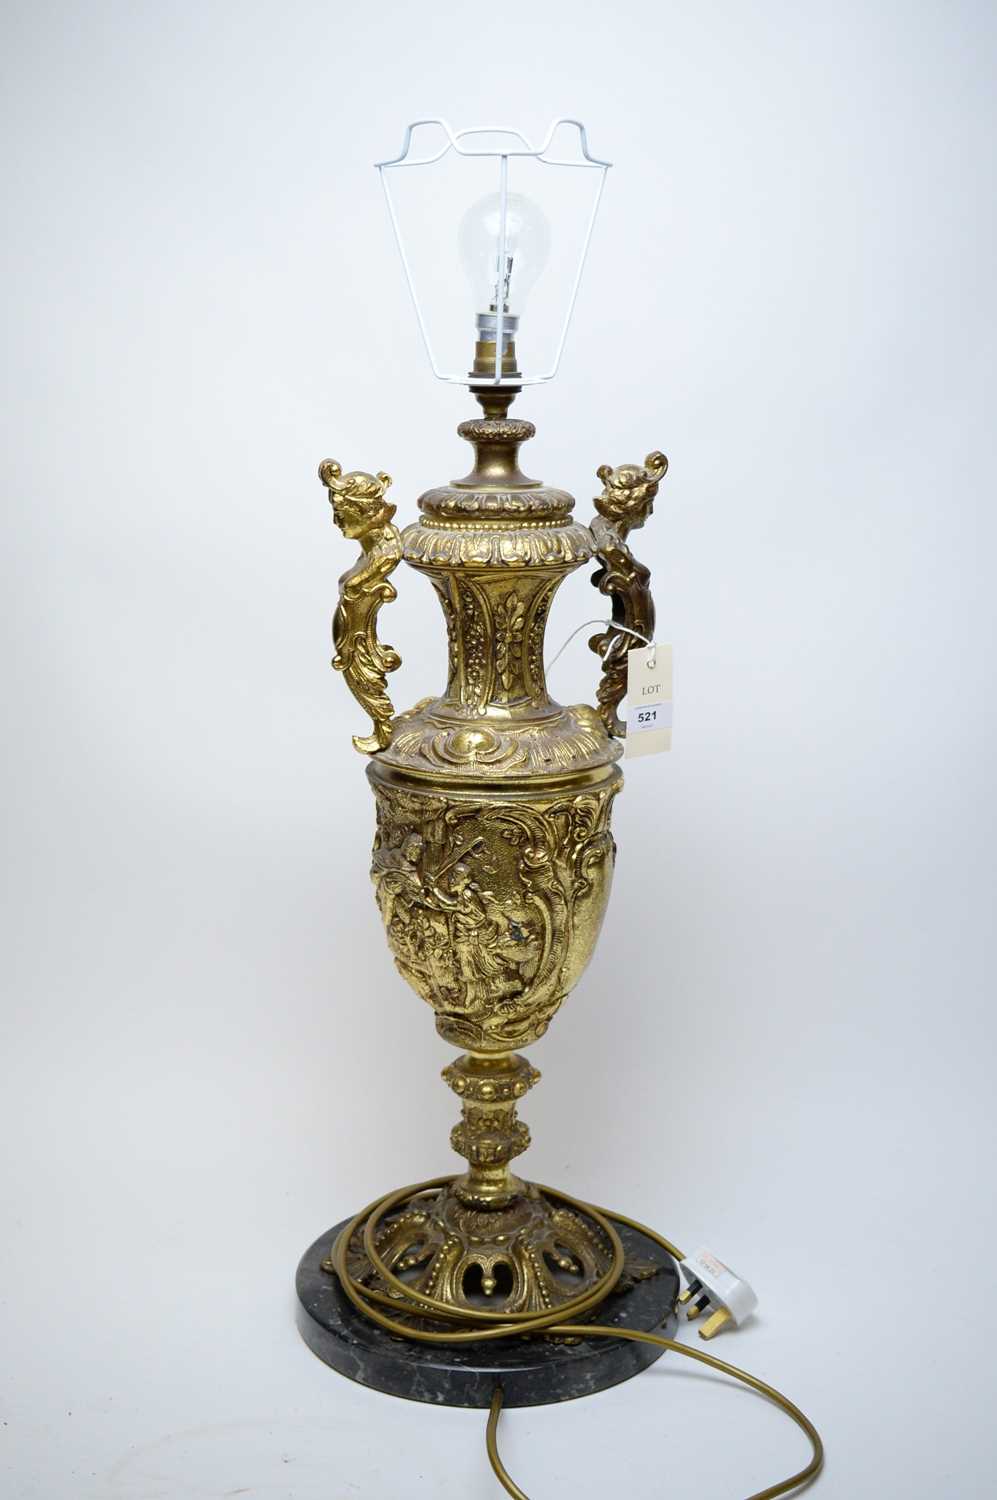 Lot 521 - Early 20th century gilt metal table lamp